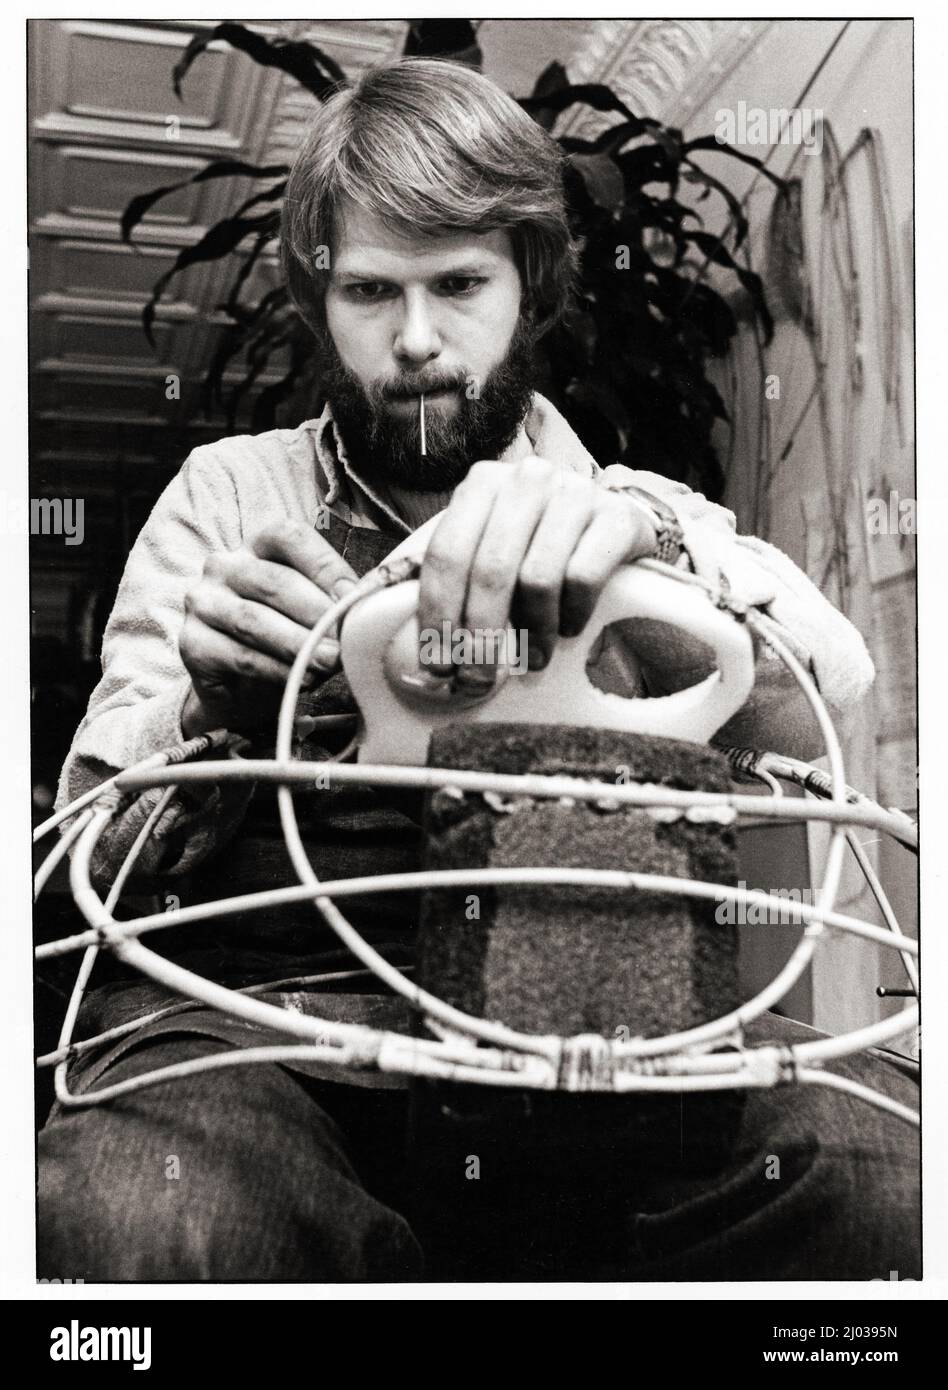 A young man, perhaps a student or an intern, helps builds a puppet in the studio of the legendary puppet builder, Kermit Love. It was for a foreign country's version of Sesame Street. 1978 in Greenwich Village, Manhattan, on Great Jones Street. Stock Photo